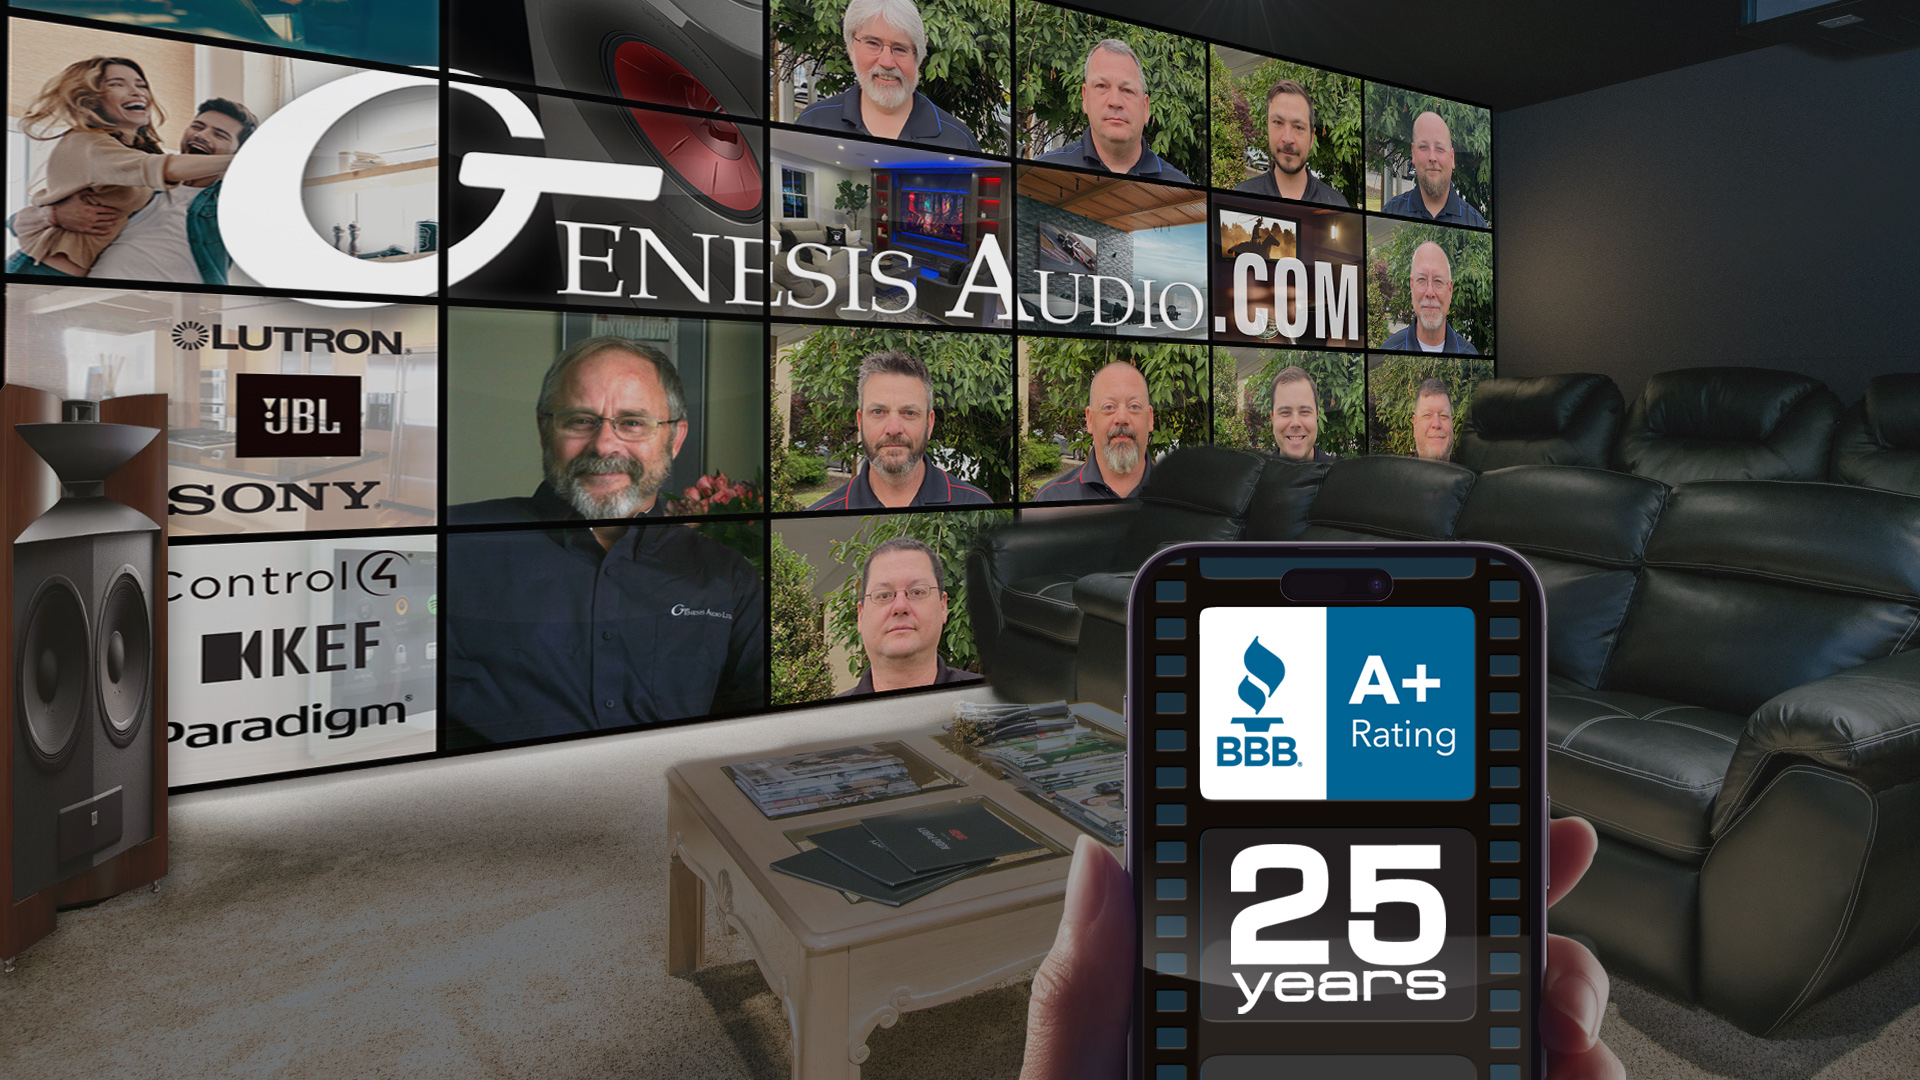 Genesis Audio employees serving Columbus for over 25 years.